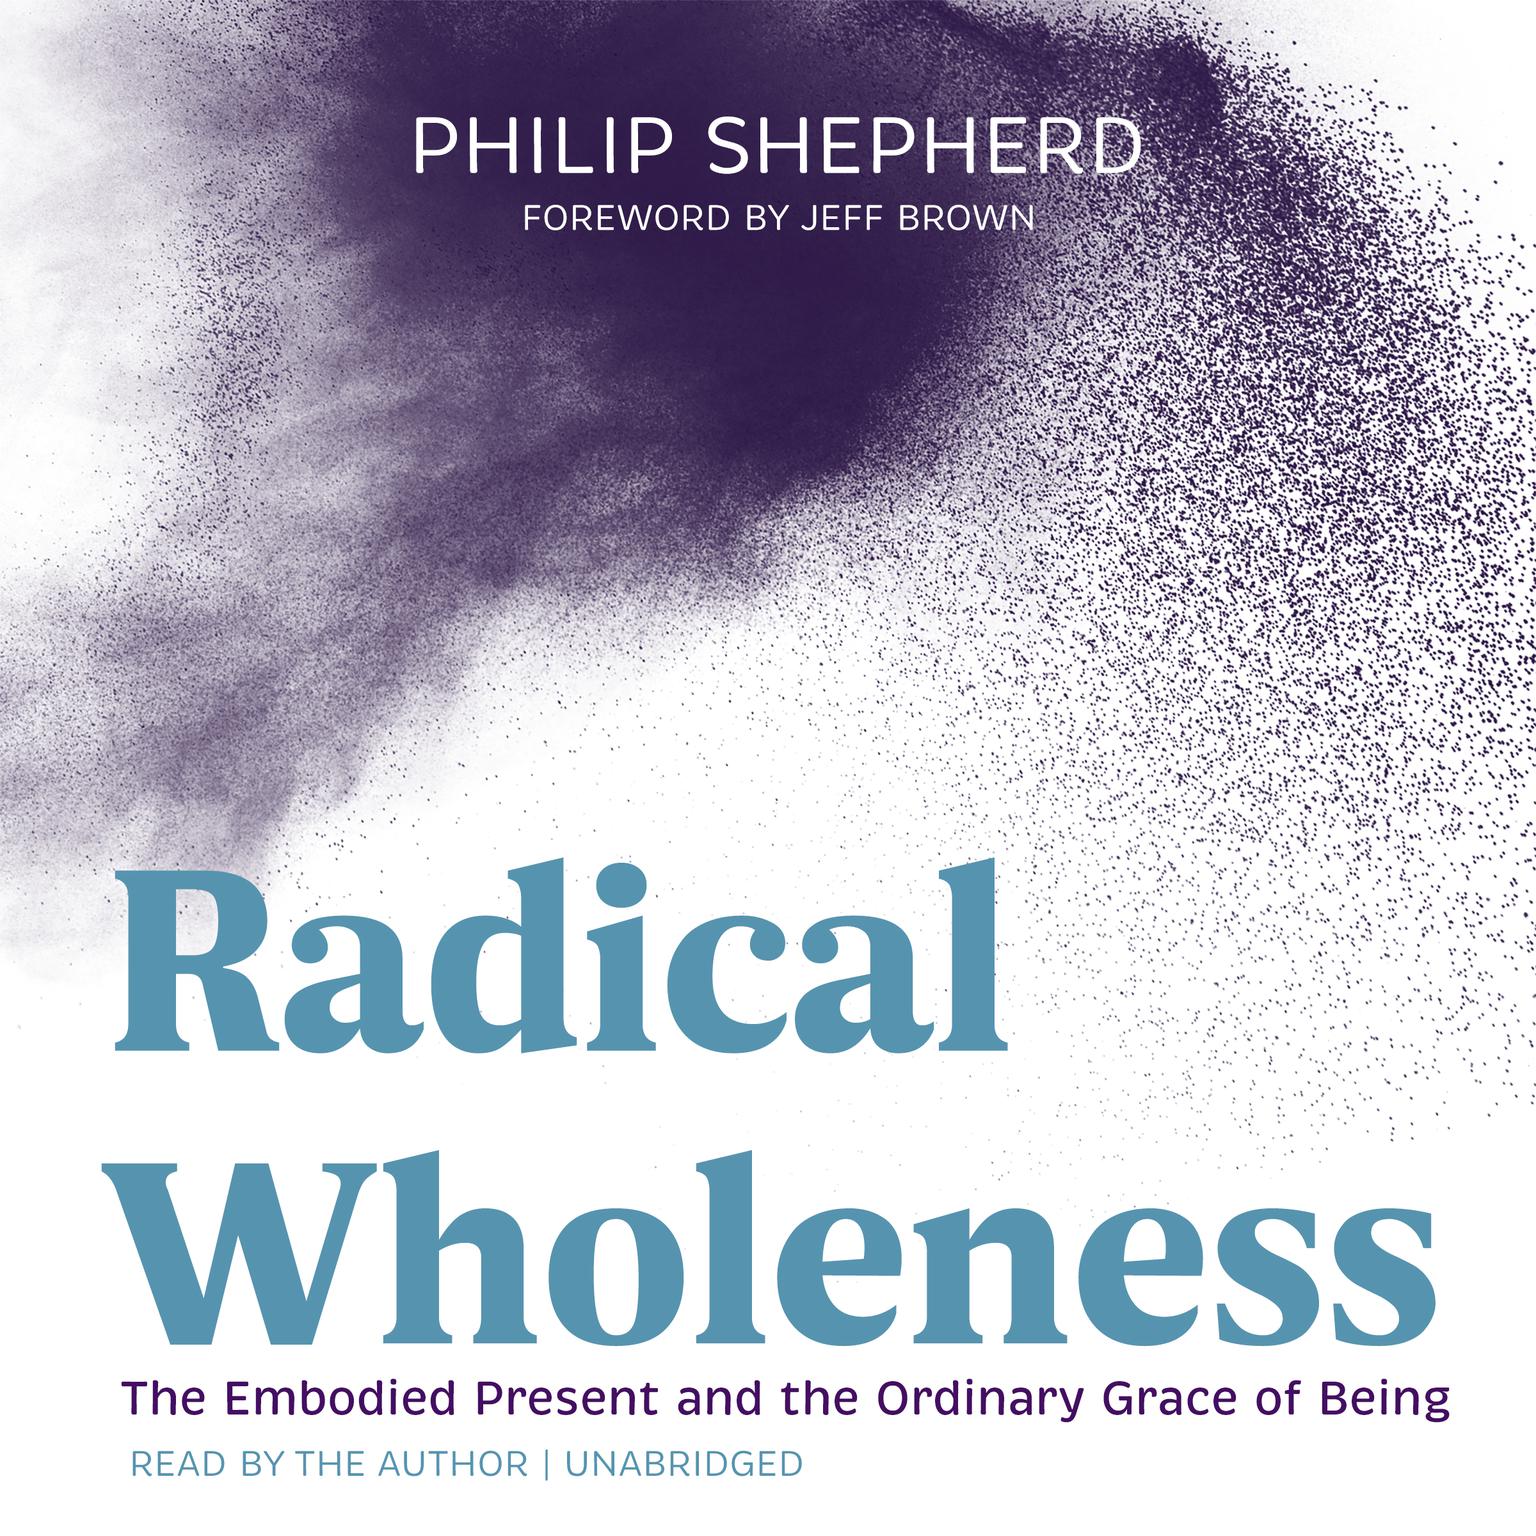 Radical Wholeness: The Embodied Present and the Ordinary Grace of Being Audiobook, by Philip Shepherd